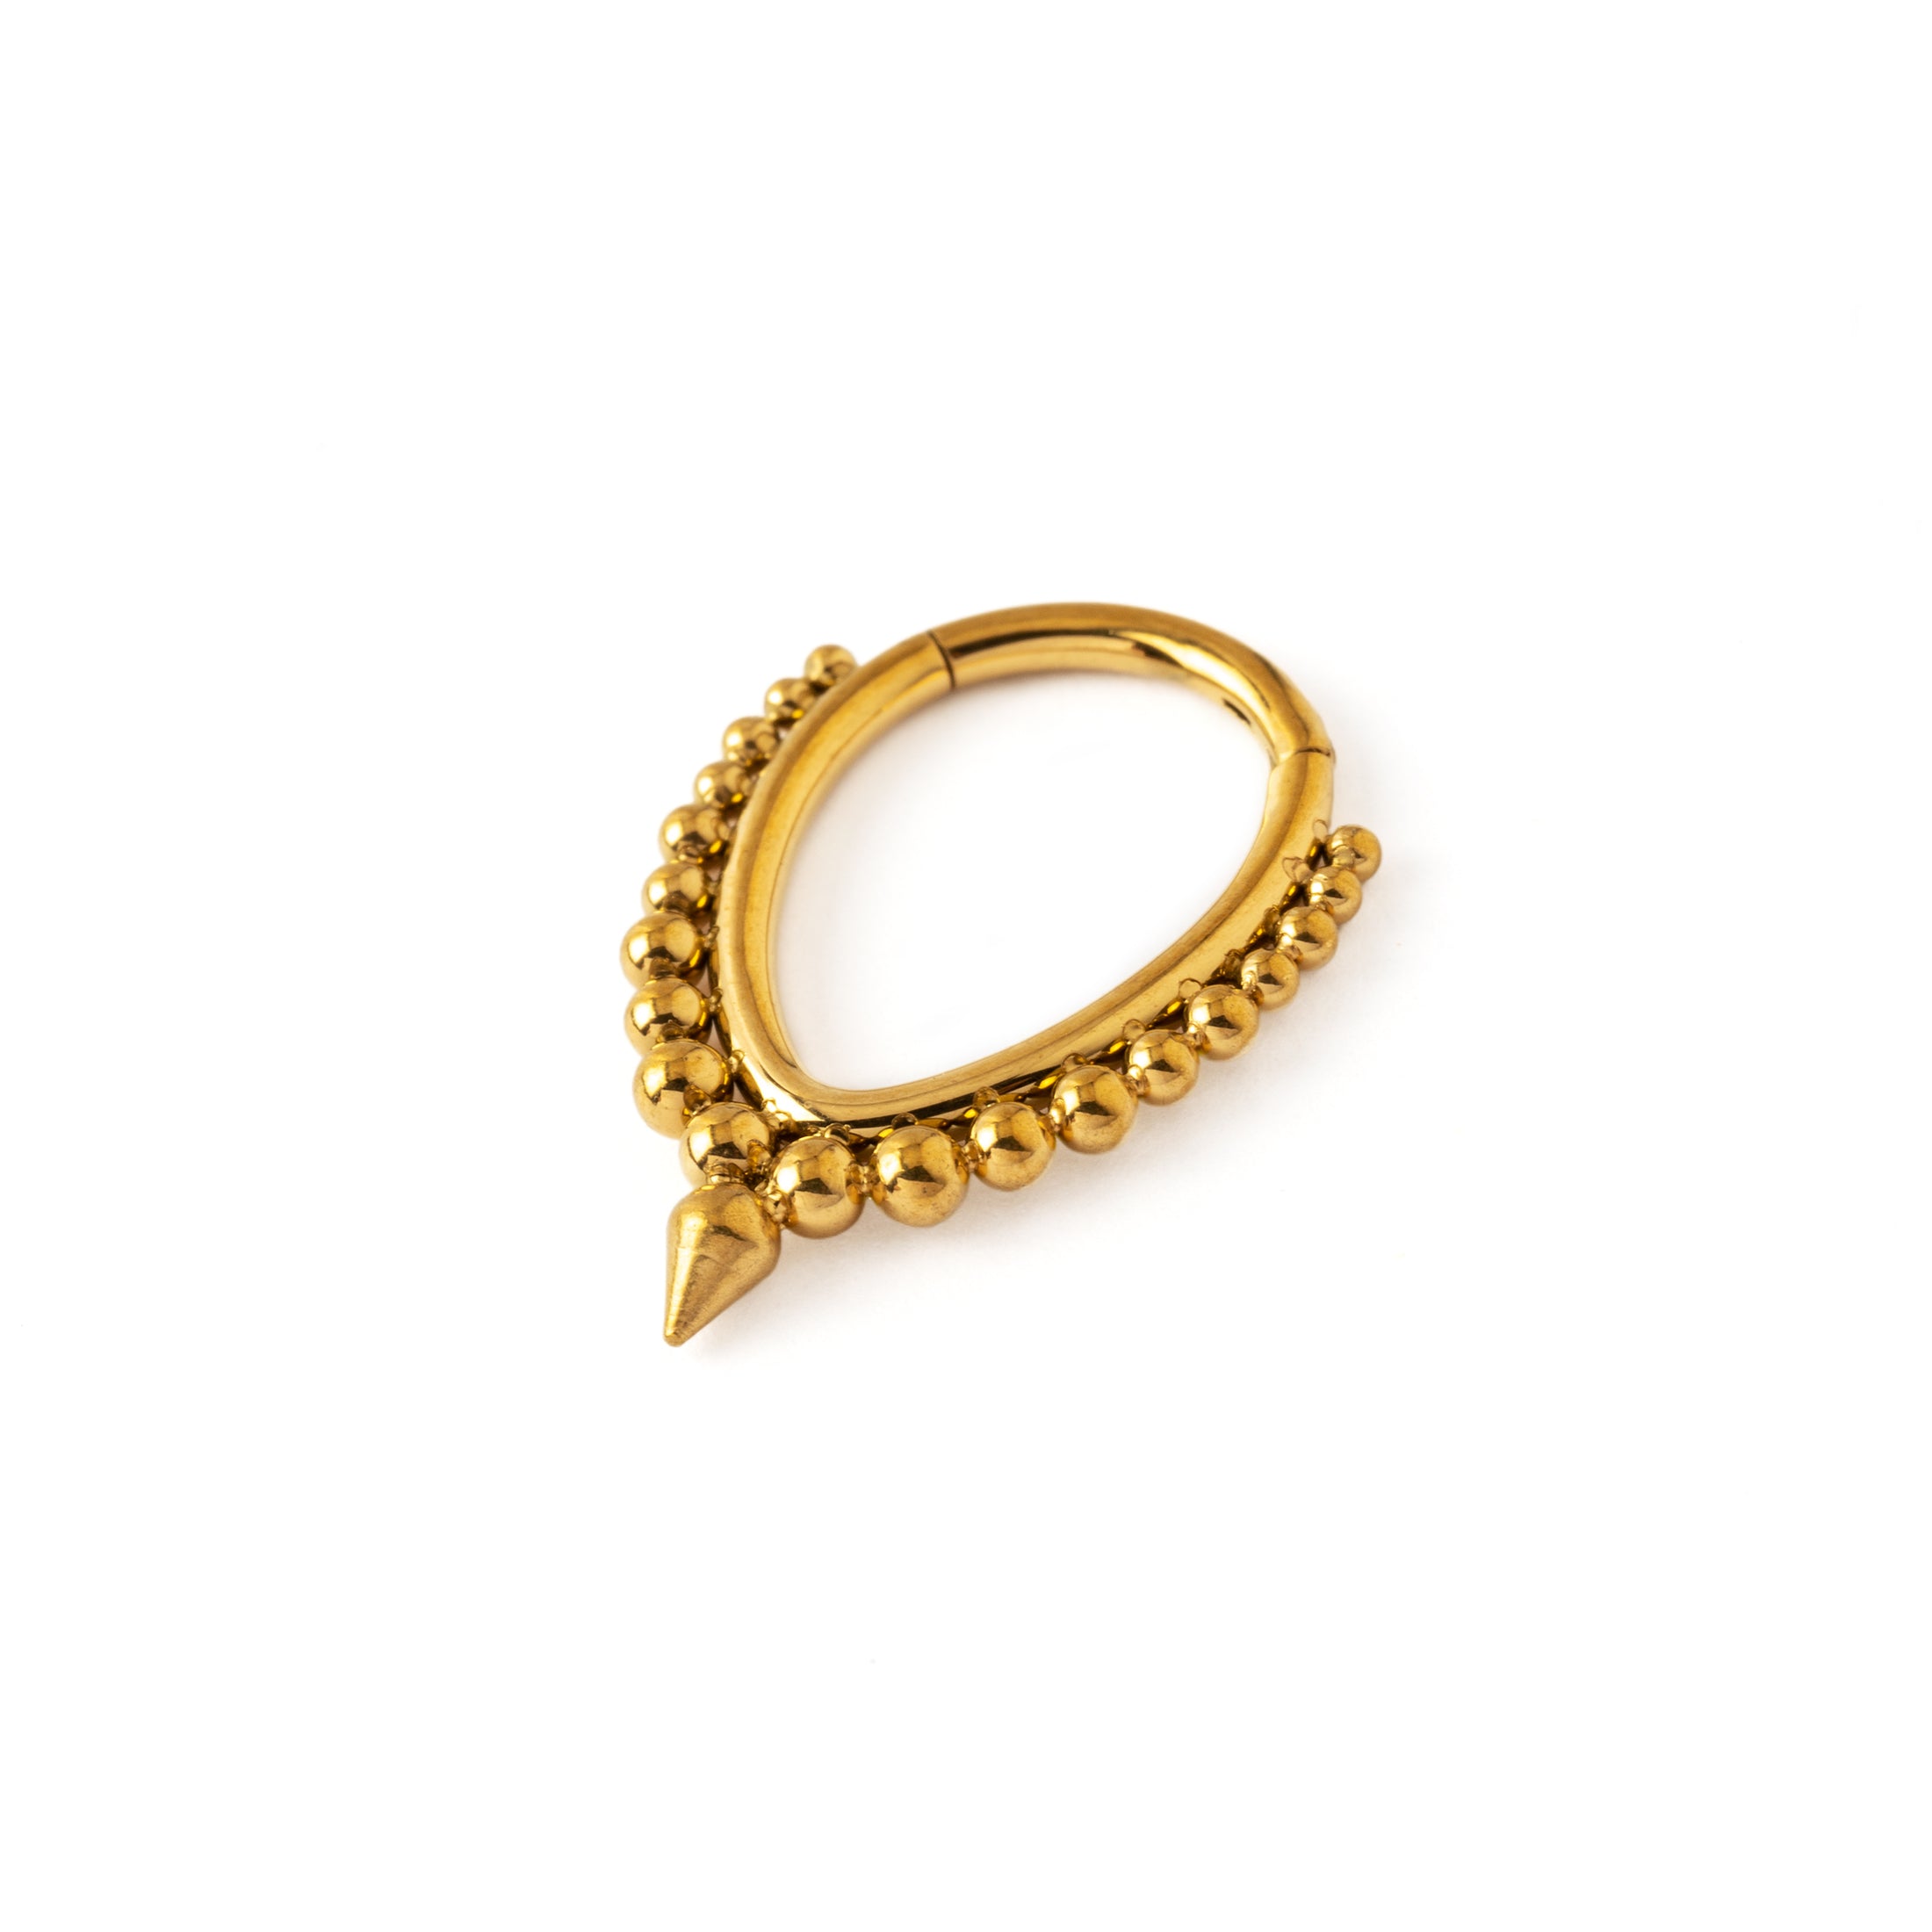 Brenna Golden surgical steel Septum Clicker ring right side view